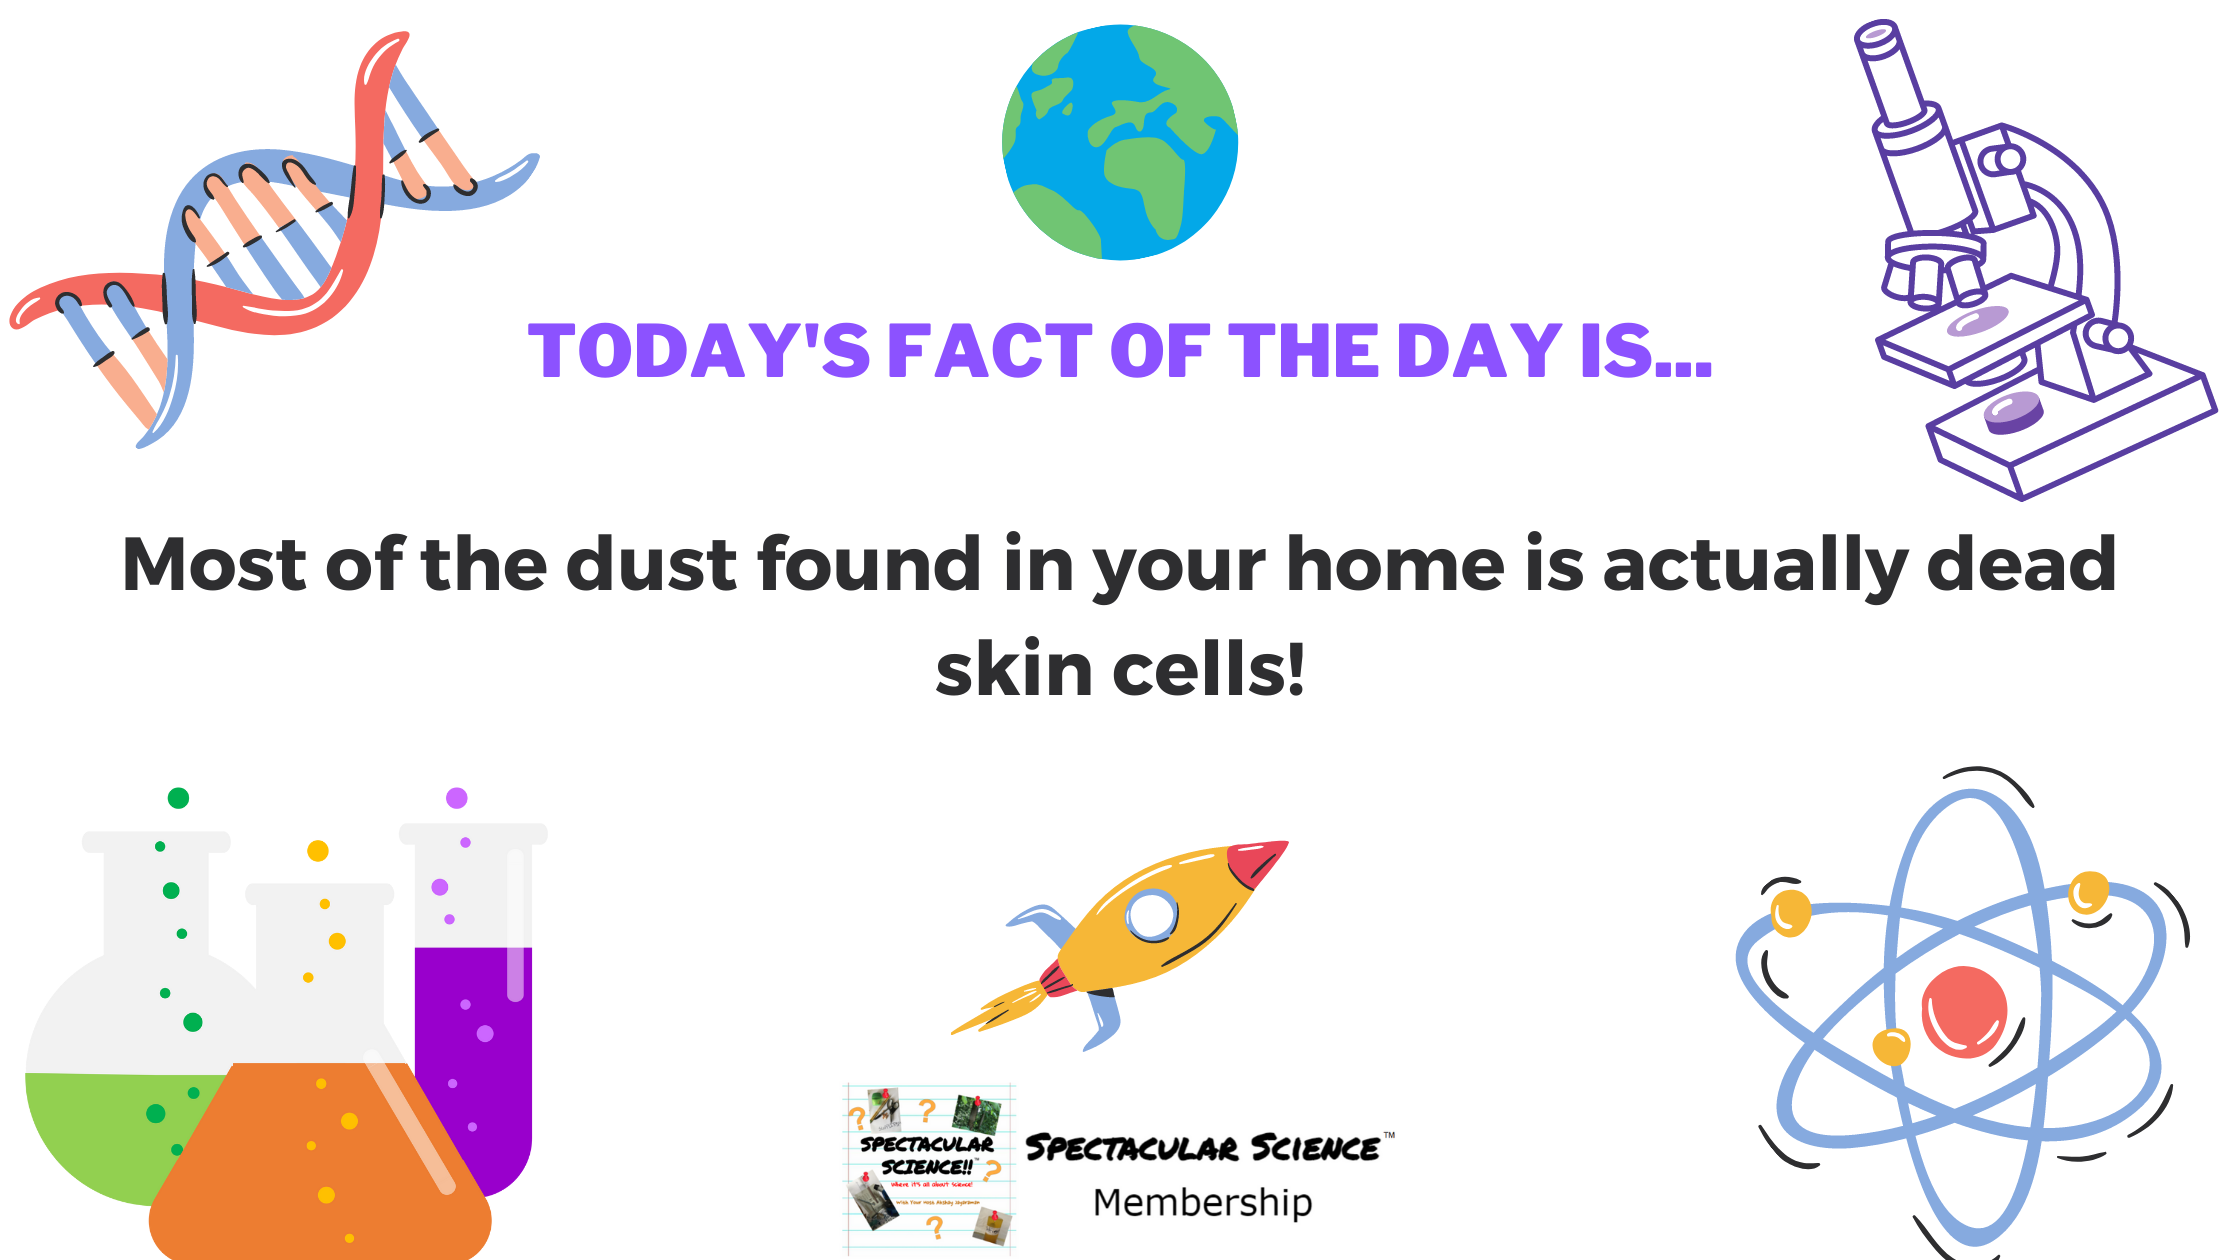 Fact of the Day Image Apr. 14th